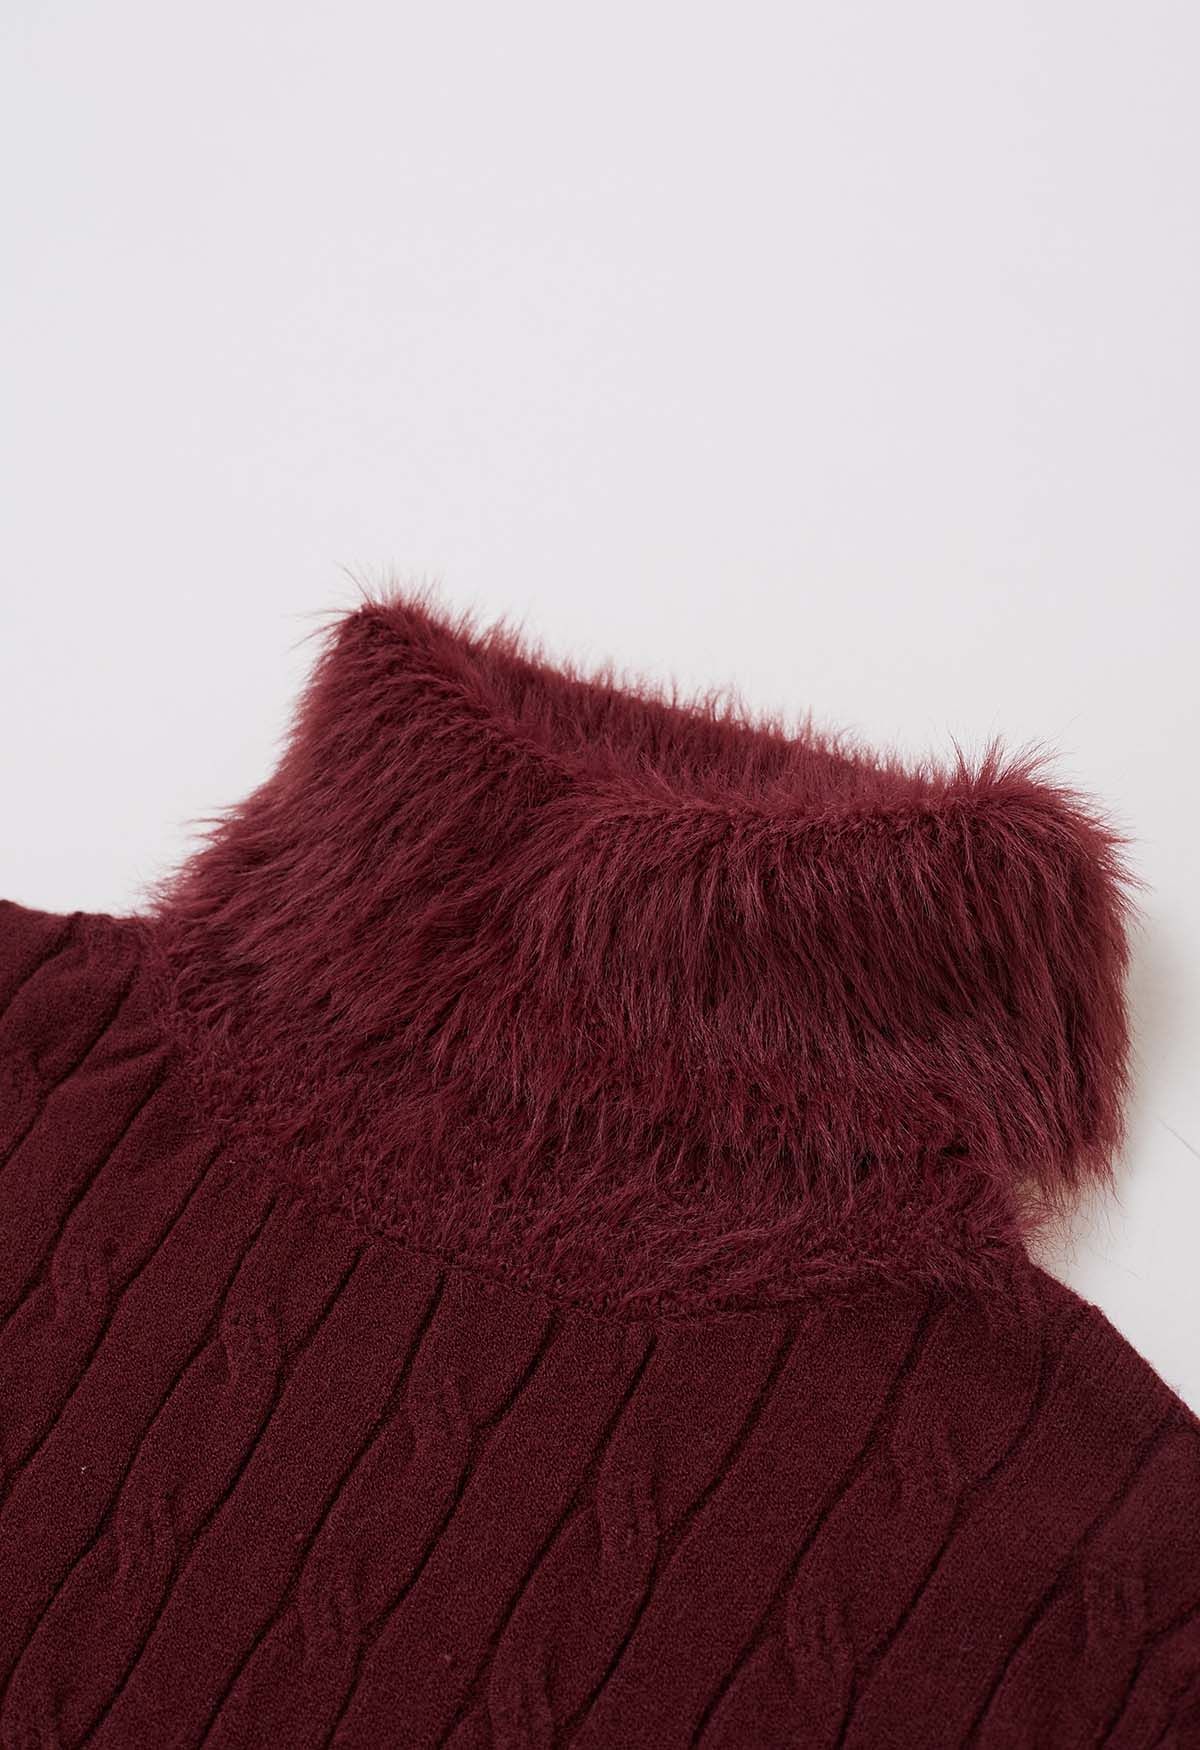 Soft Fuzzy Turtleneck Cable Knit Sweater in Burgundy